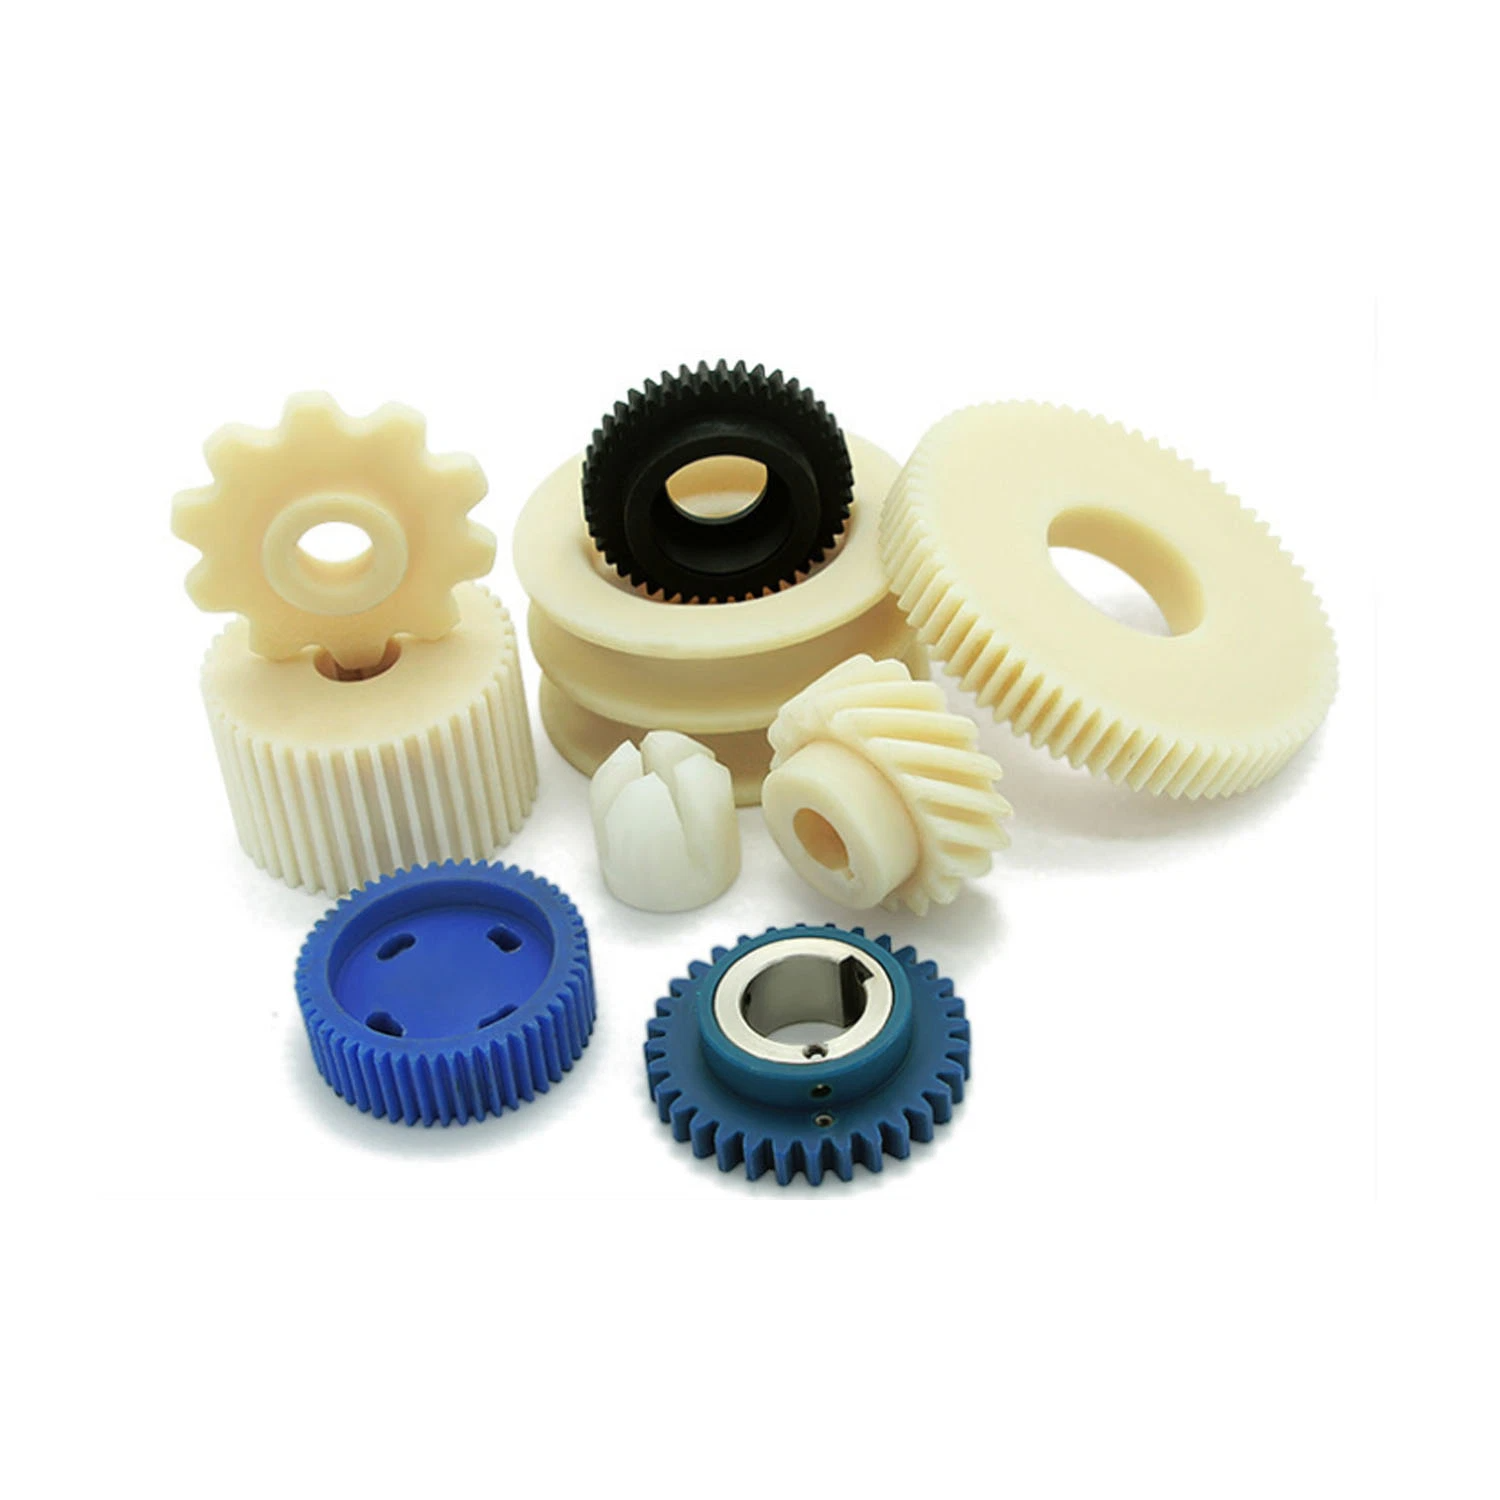 About injection molding product introduce